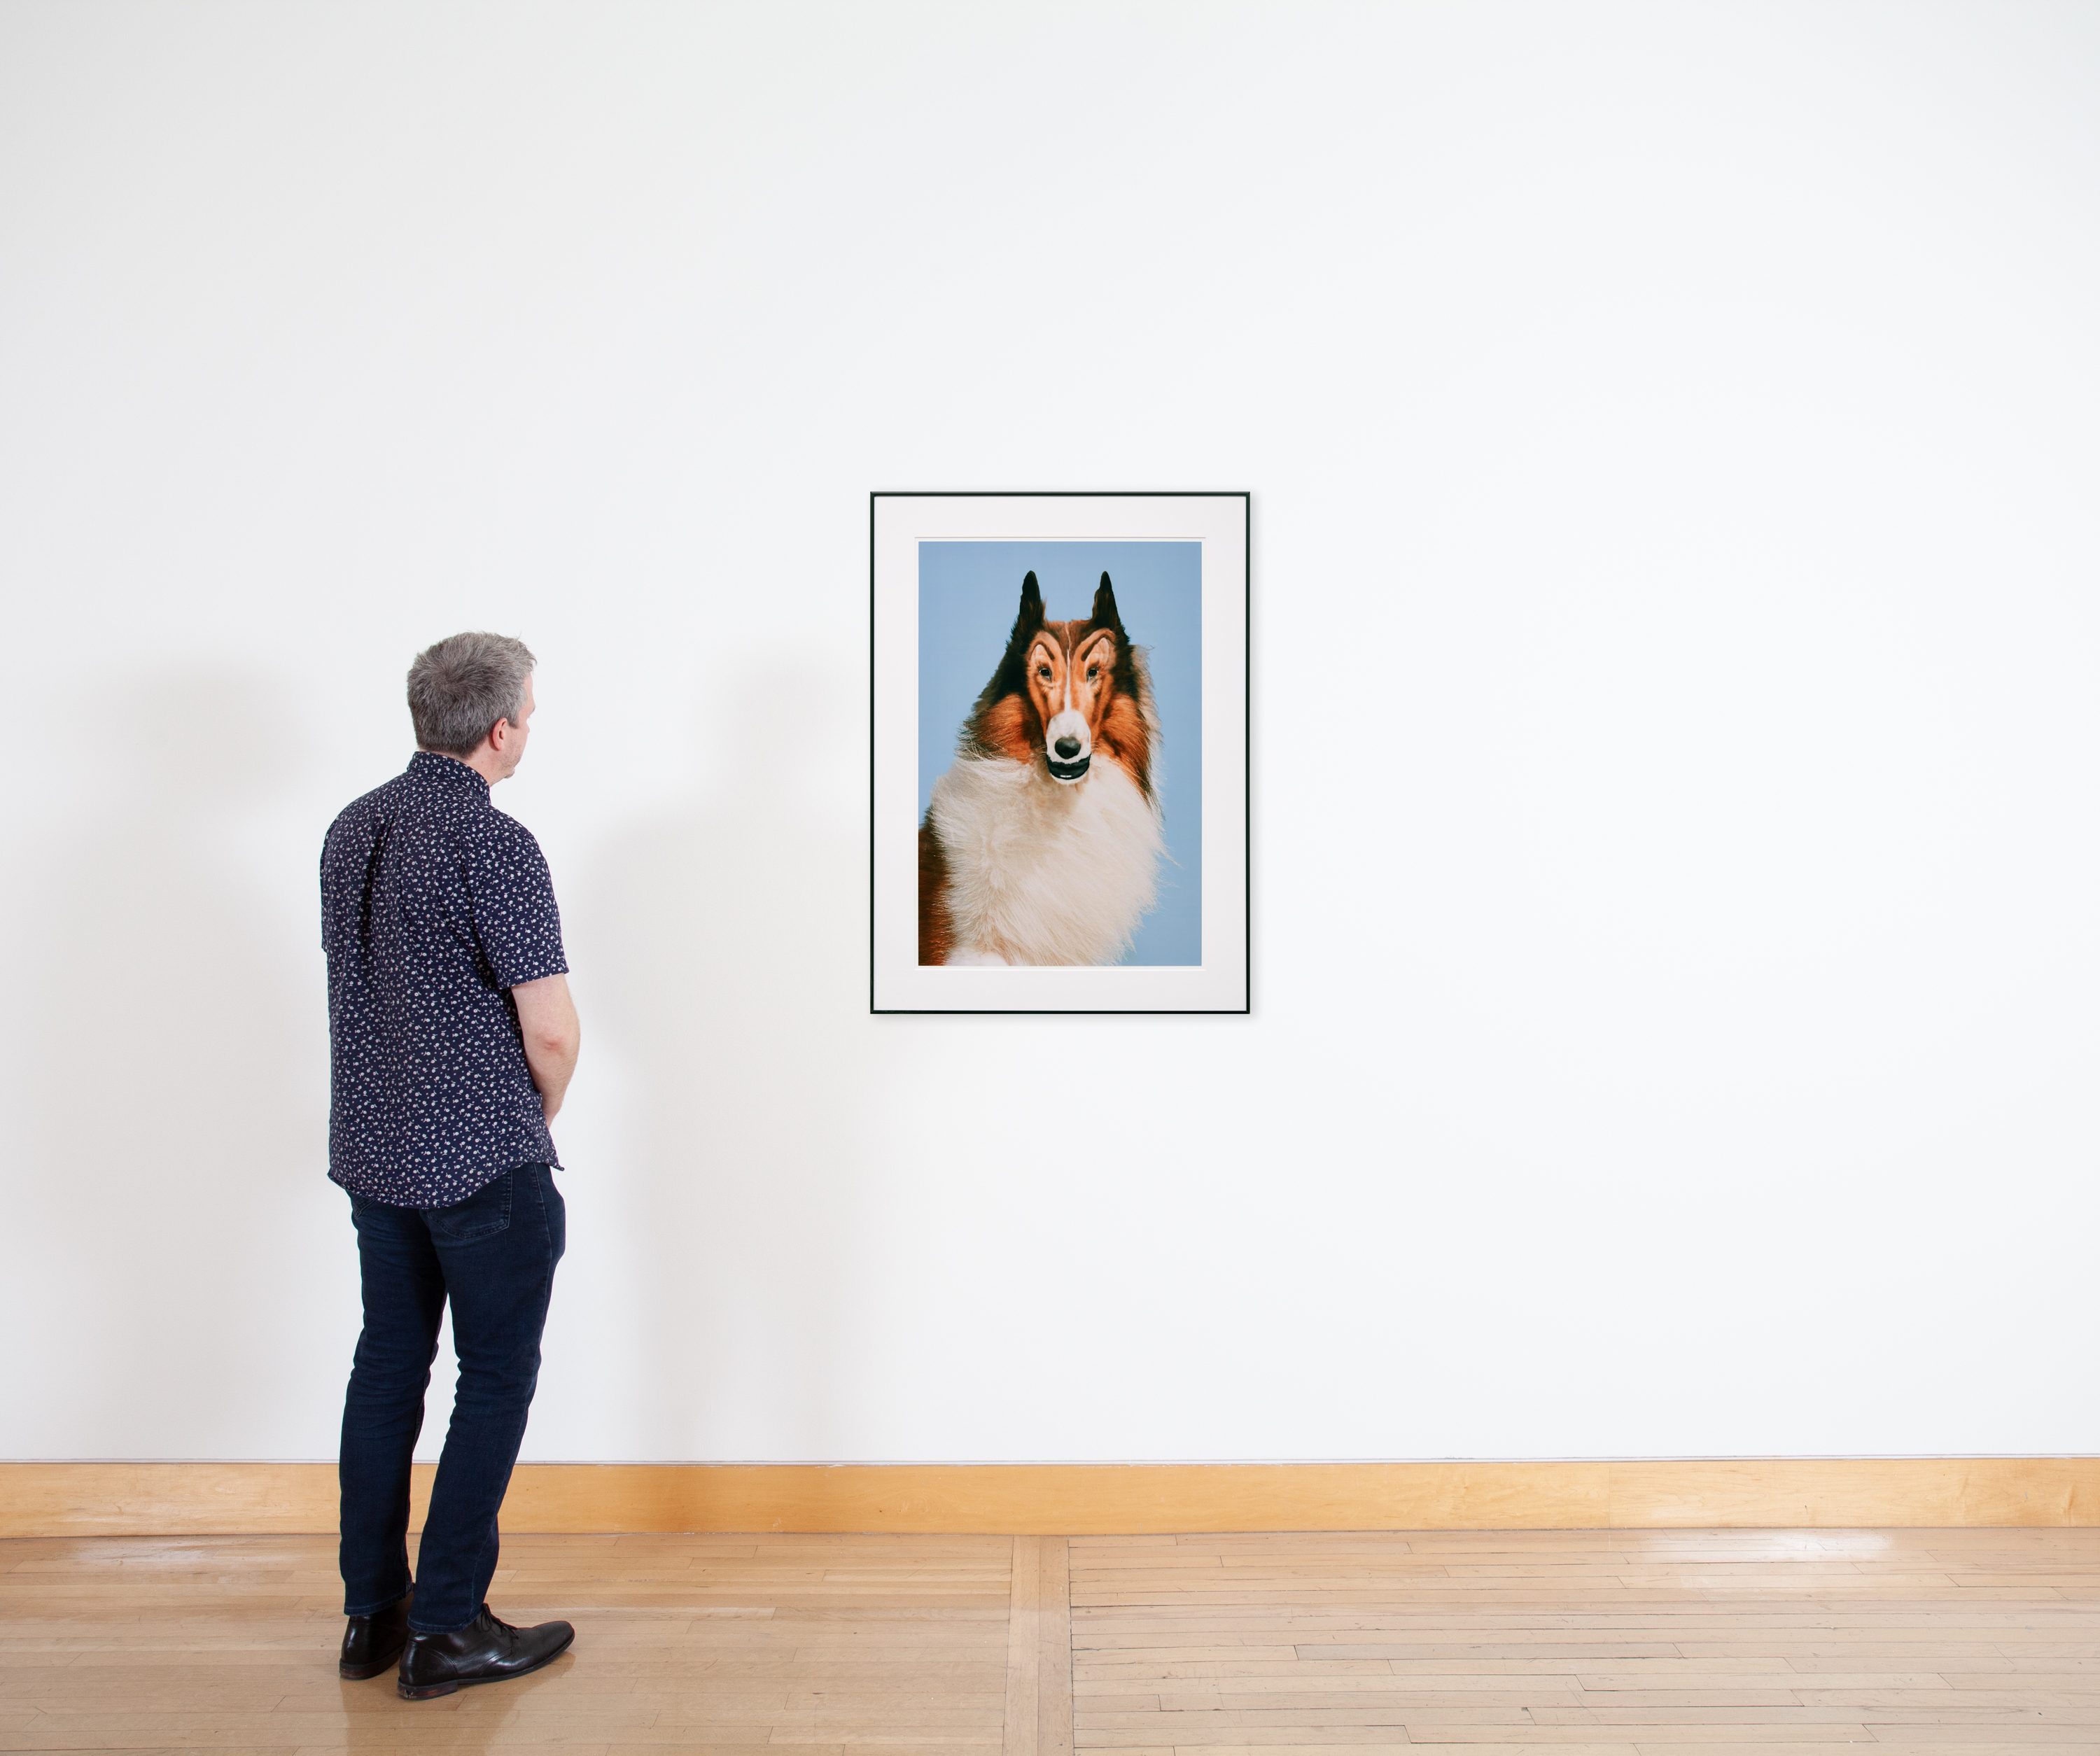 Color image of a figure looking at a color photograph of an altered image of a dog portrait in front of a blue background framed in black on a white wall